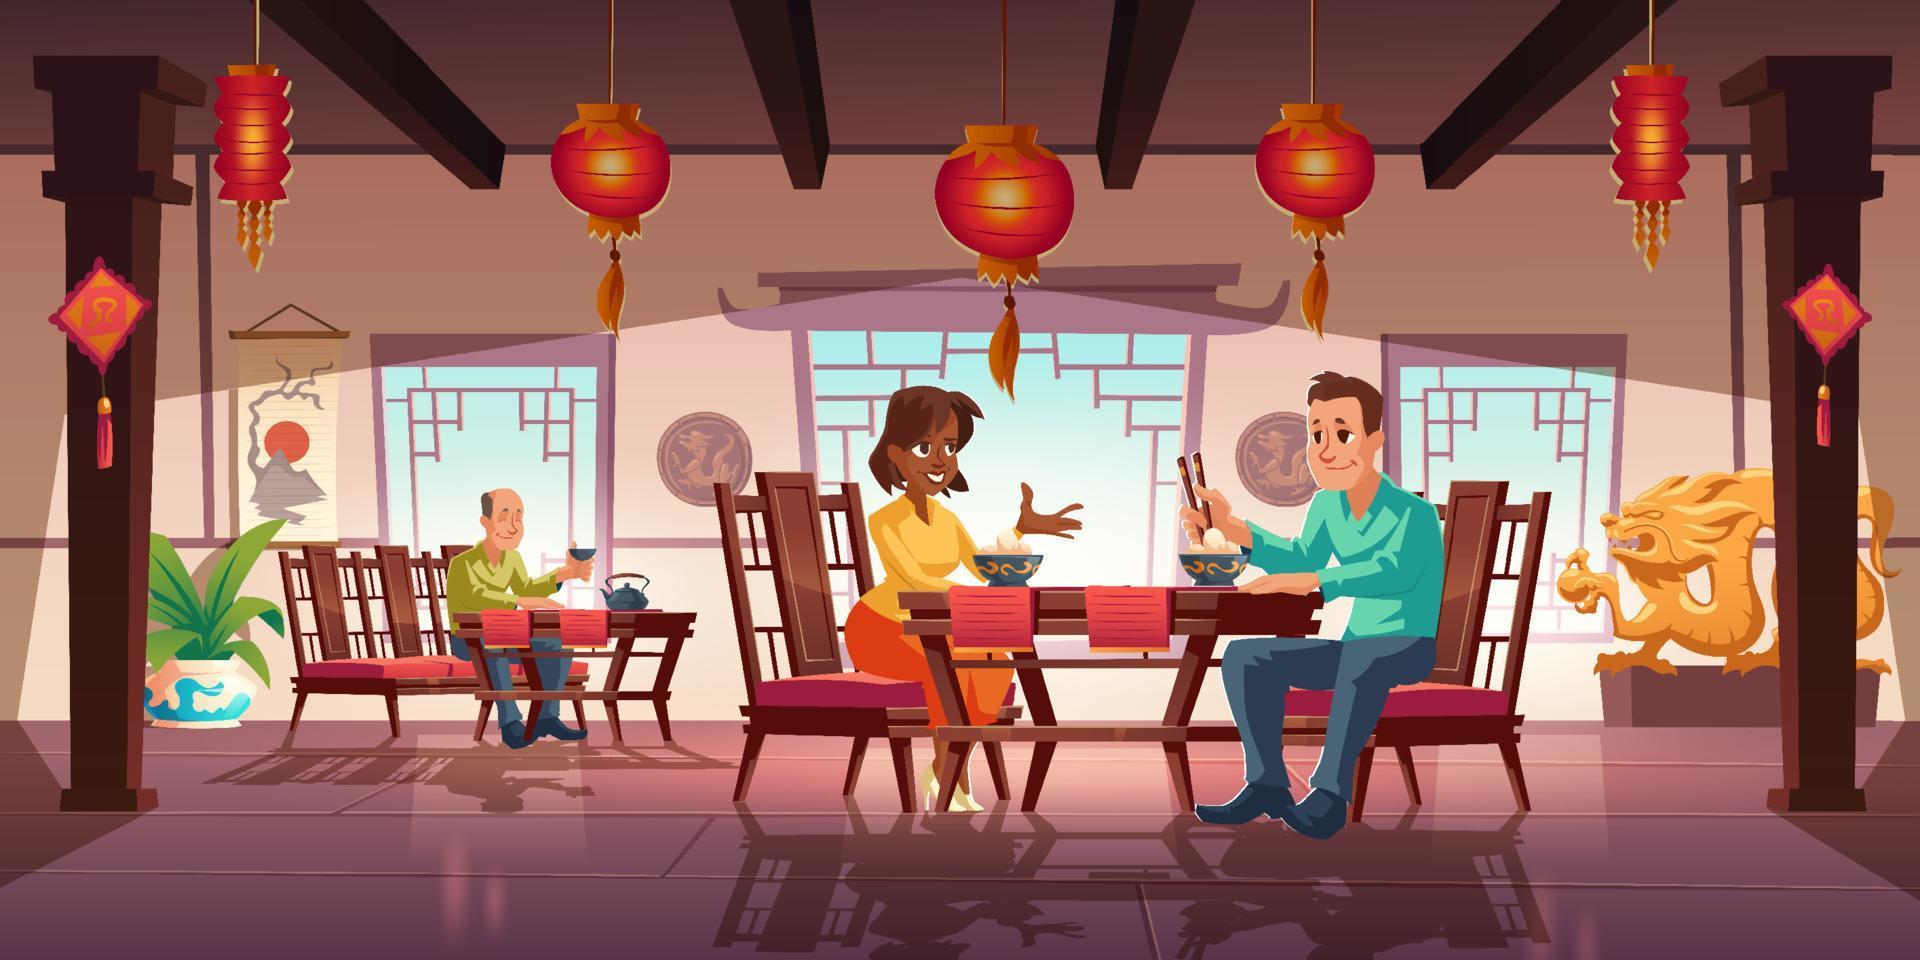 People dining in asian restaurant or cafeteria vector